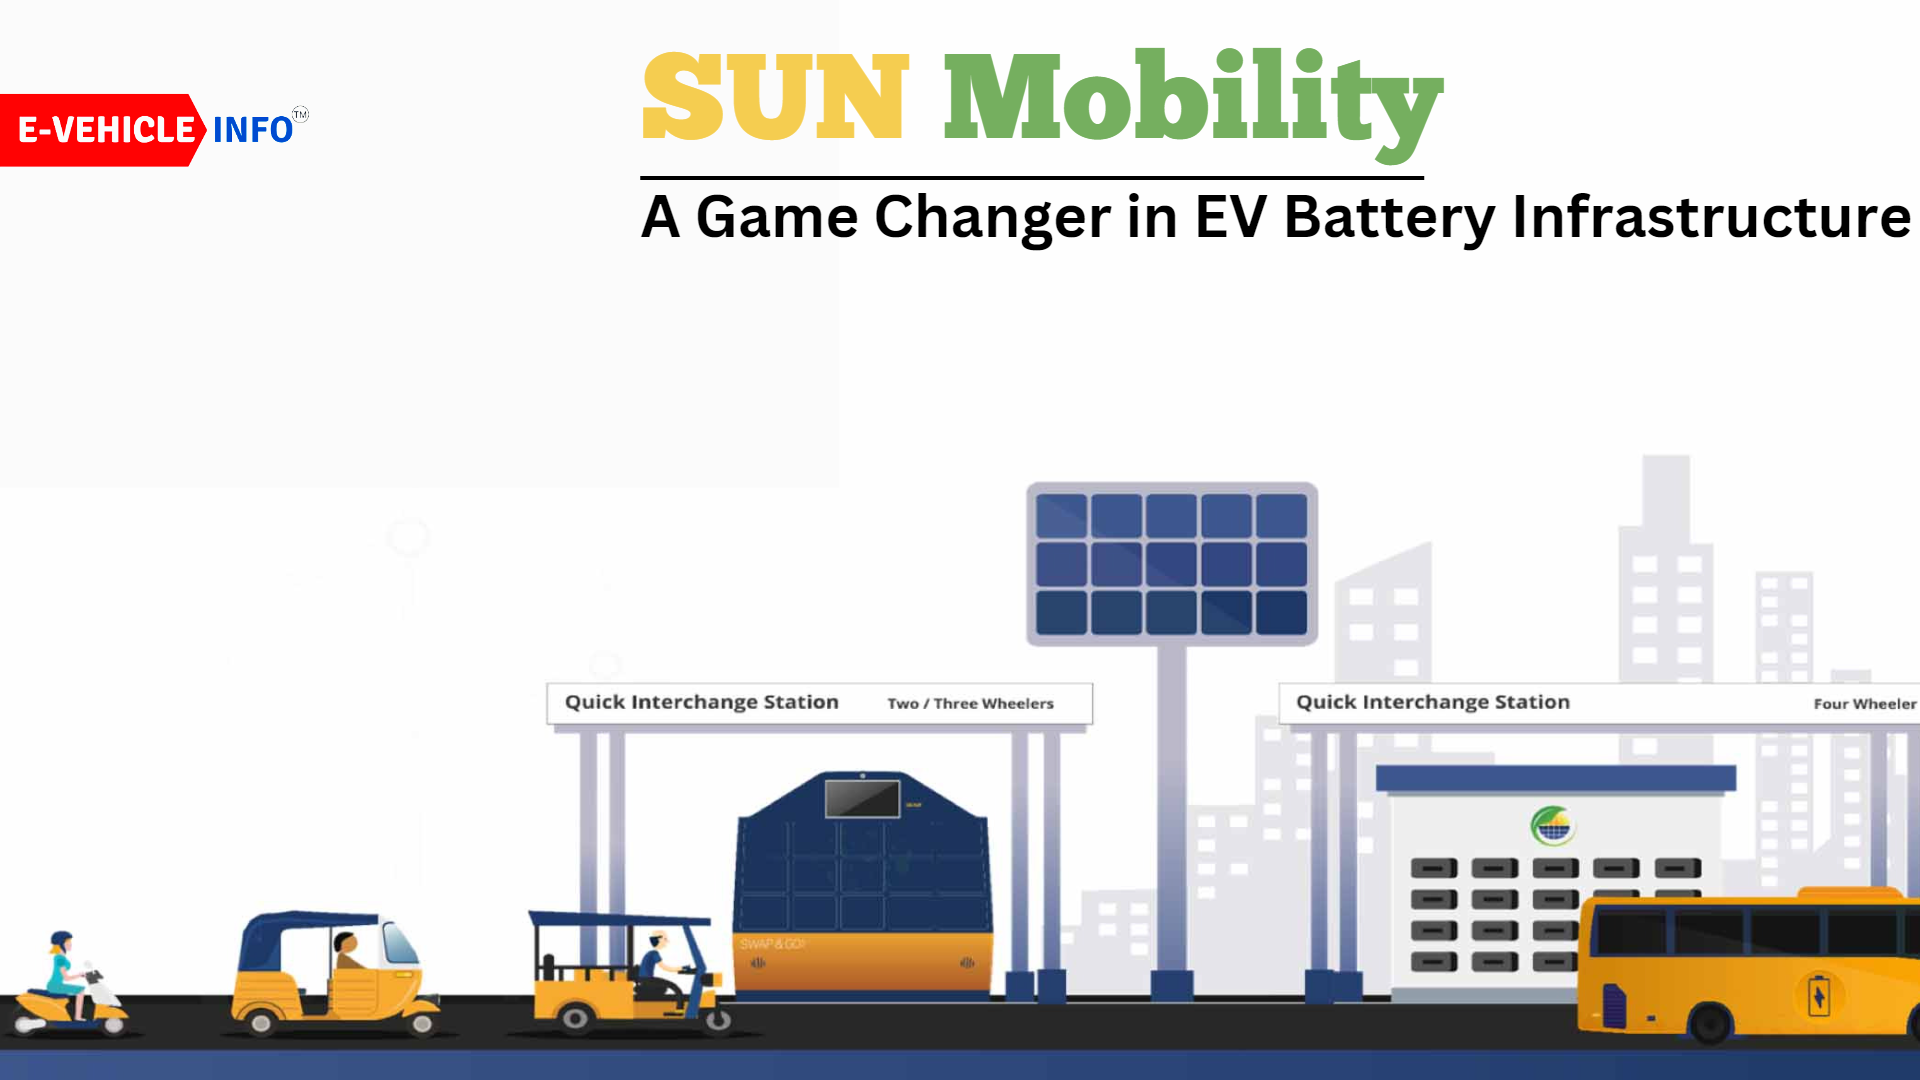 https://e-vehicleinfo.com/sun-mobility-a-game-changer-in-ev-battery-infrastructure/